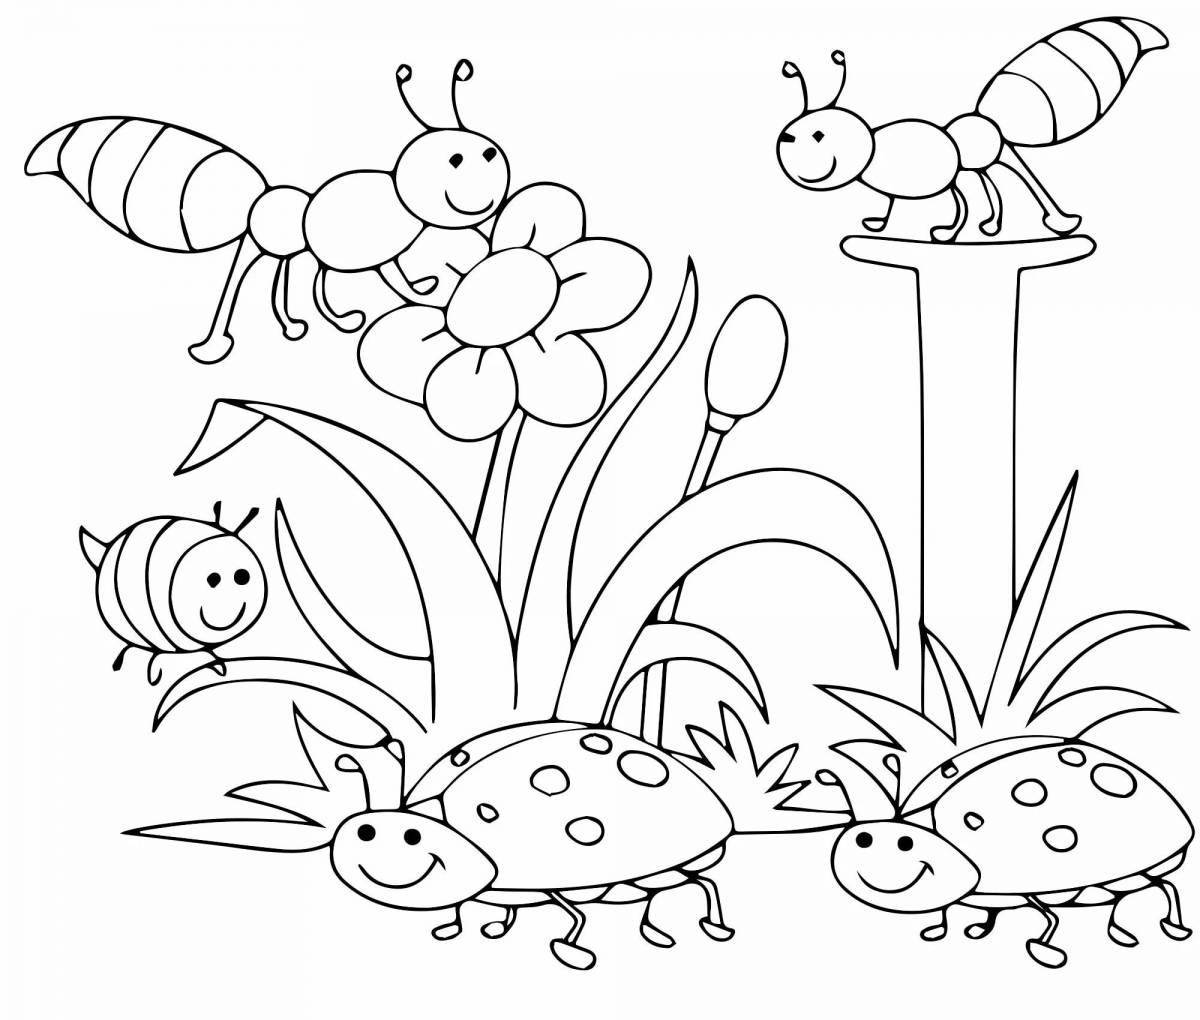 Colour-creating coloring pages for 5-6 year olds